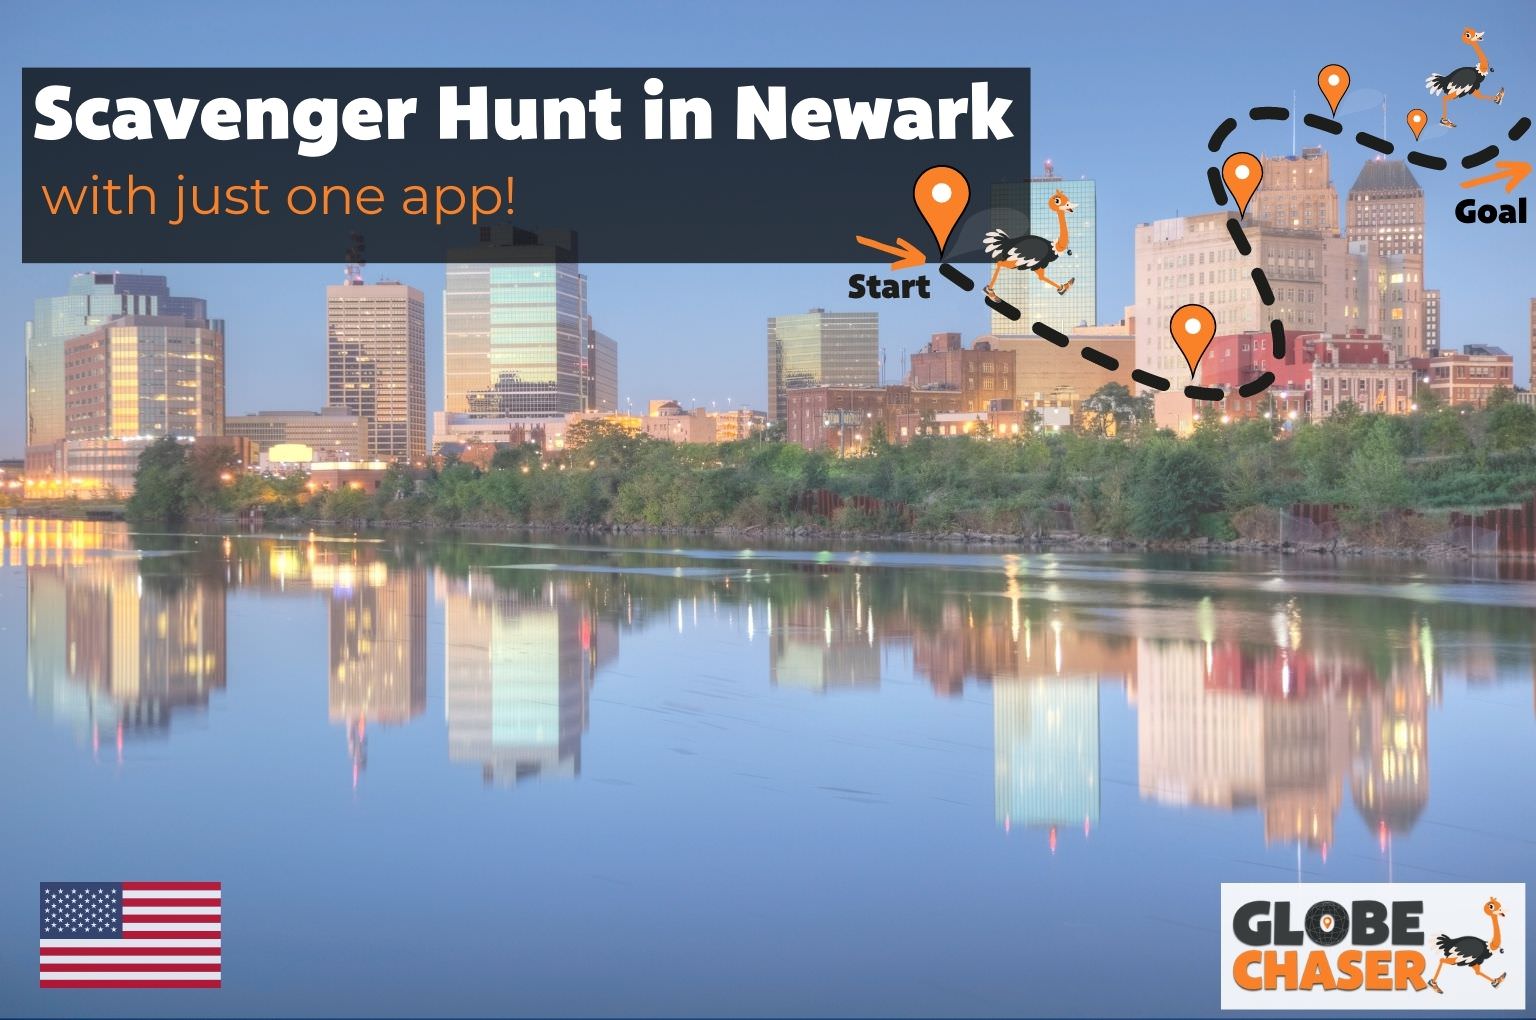 Scavenger Hunt in Newark, USA - Family Activities with the Globe Chaser App for Outdoor Fun